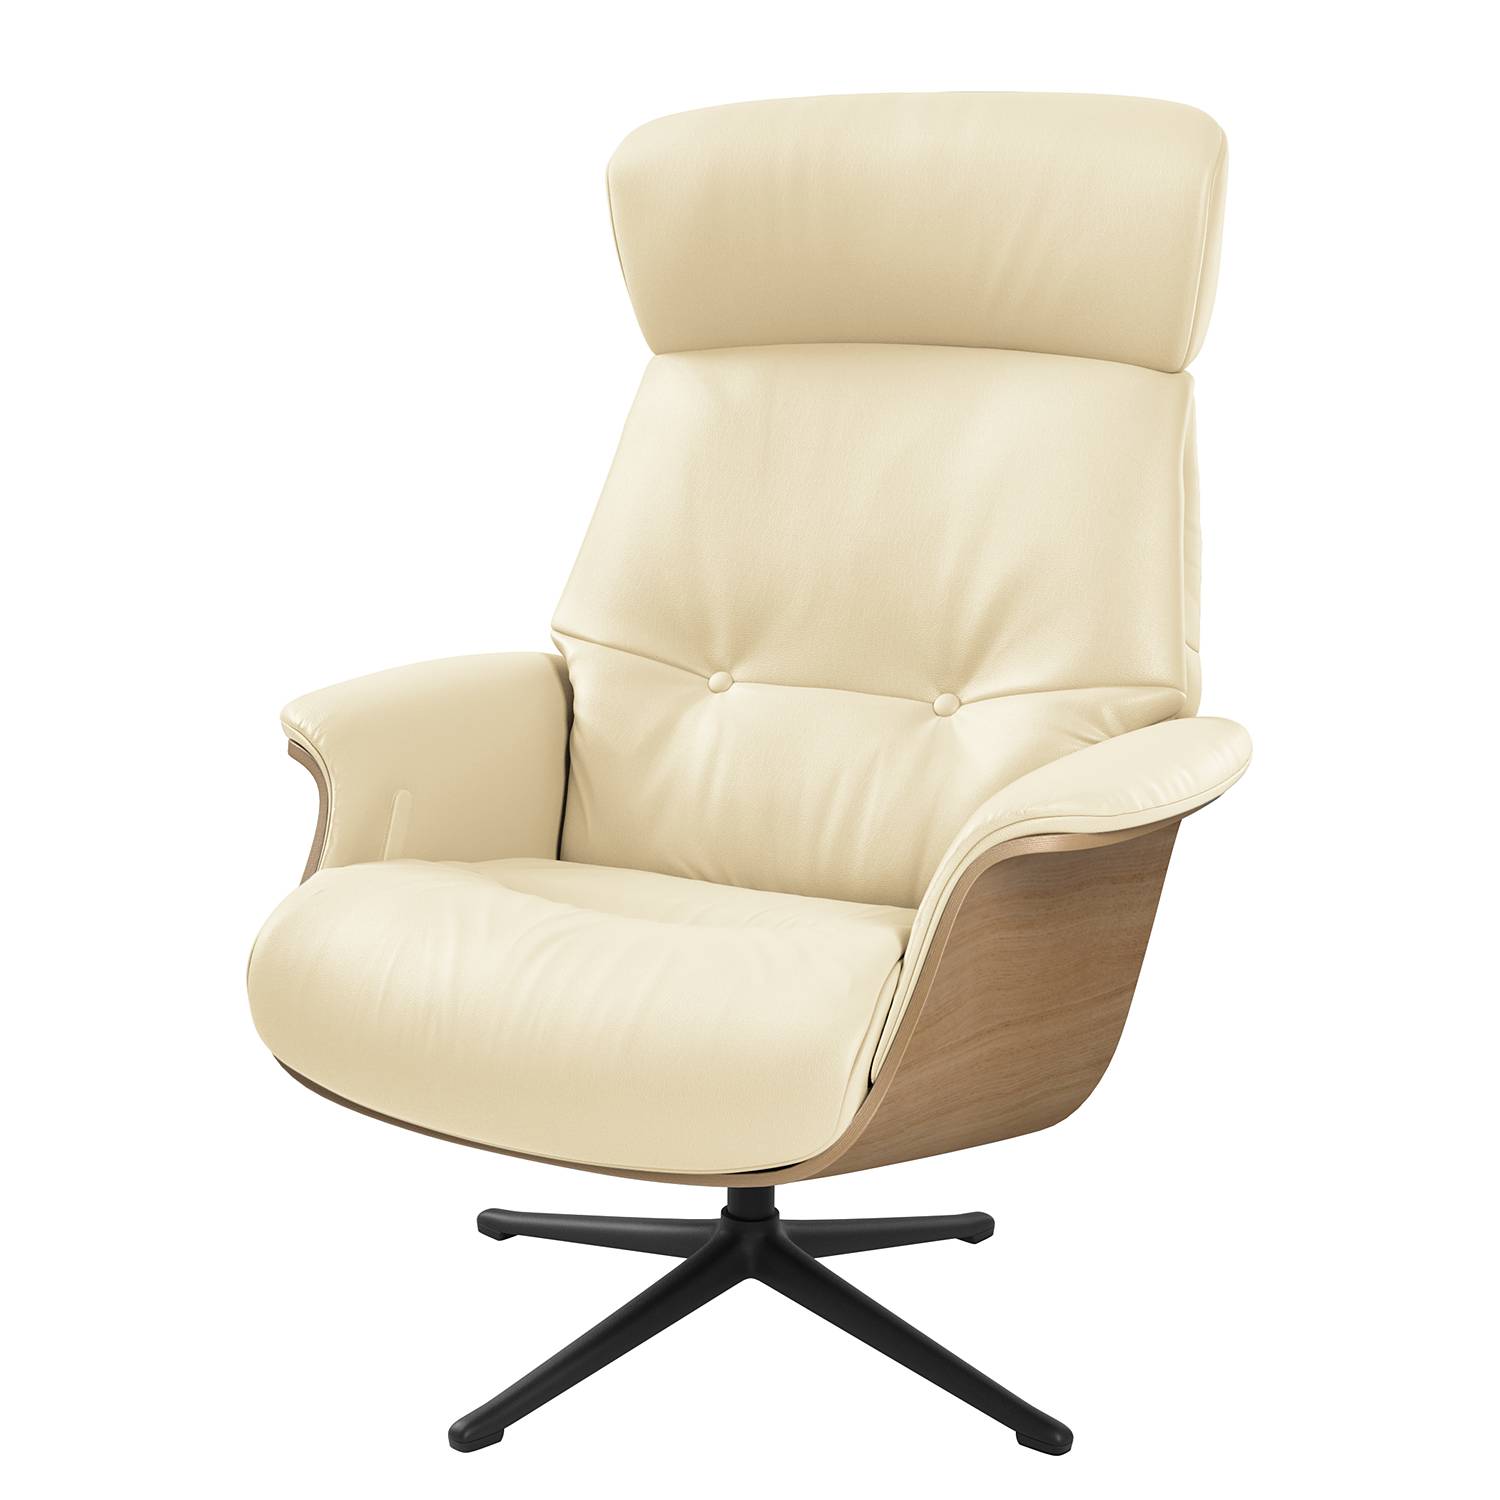 Image of Fauteuil relax Anderson I 000000001000131272